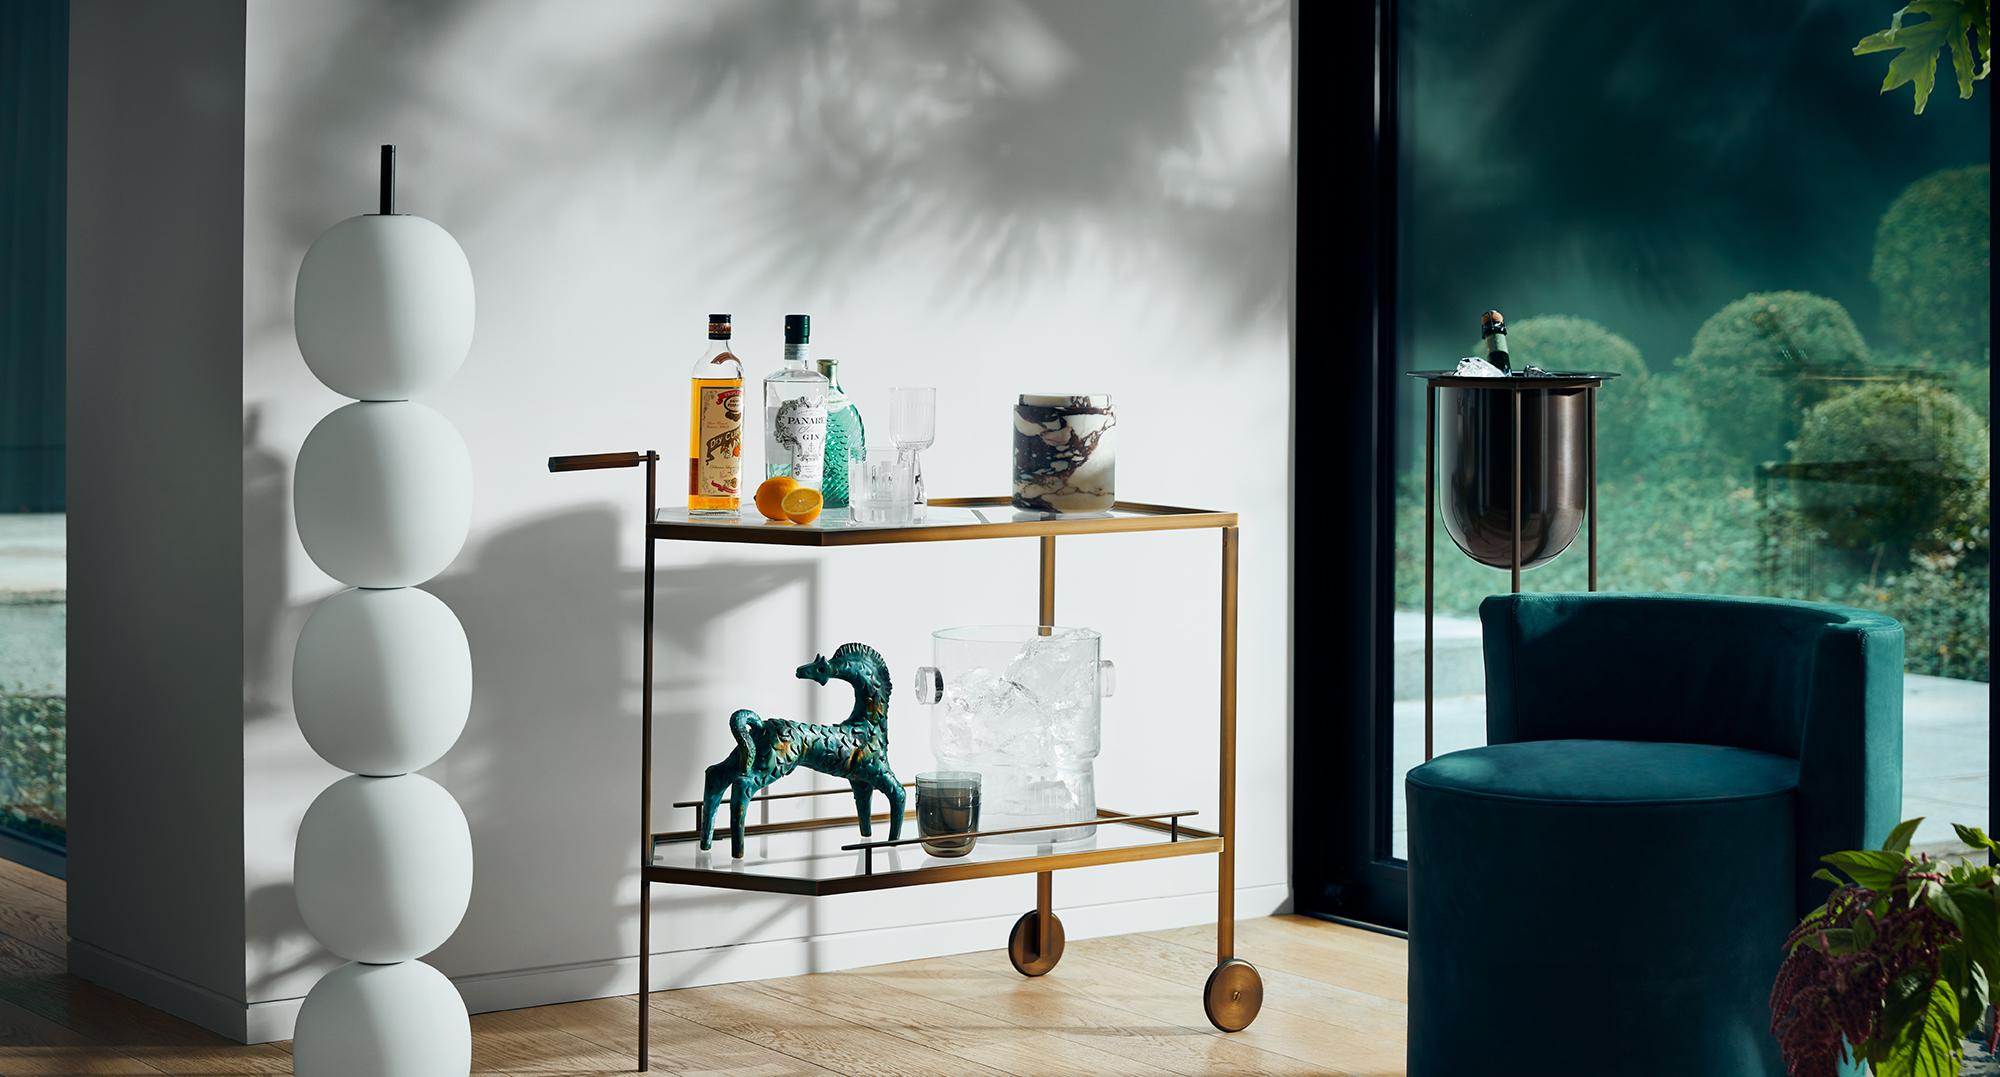 The Pacific Heights wine chiller by Yabu Pushelberg mixes the sophistication of entertaining in the past with a new minimal form. The exacting metal frame is crafted in Italy and comes in smoked bronze or smoked brass finishes as its Gin Lane bar